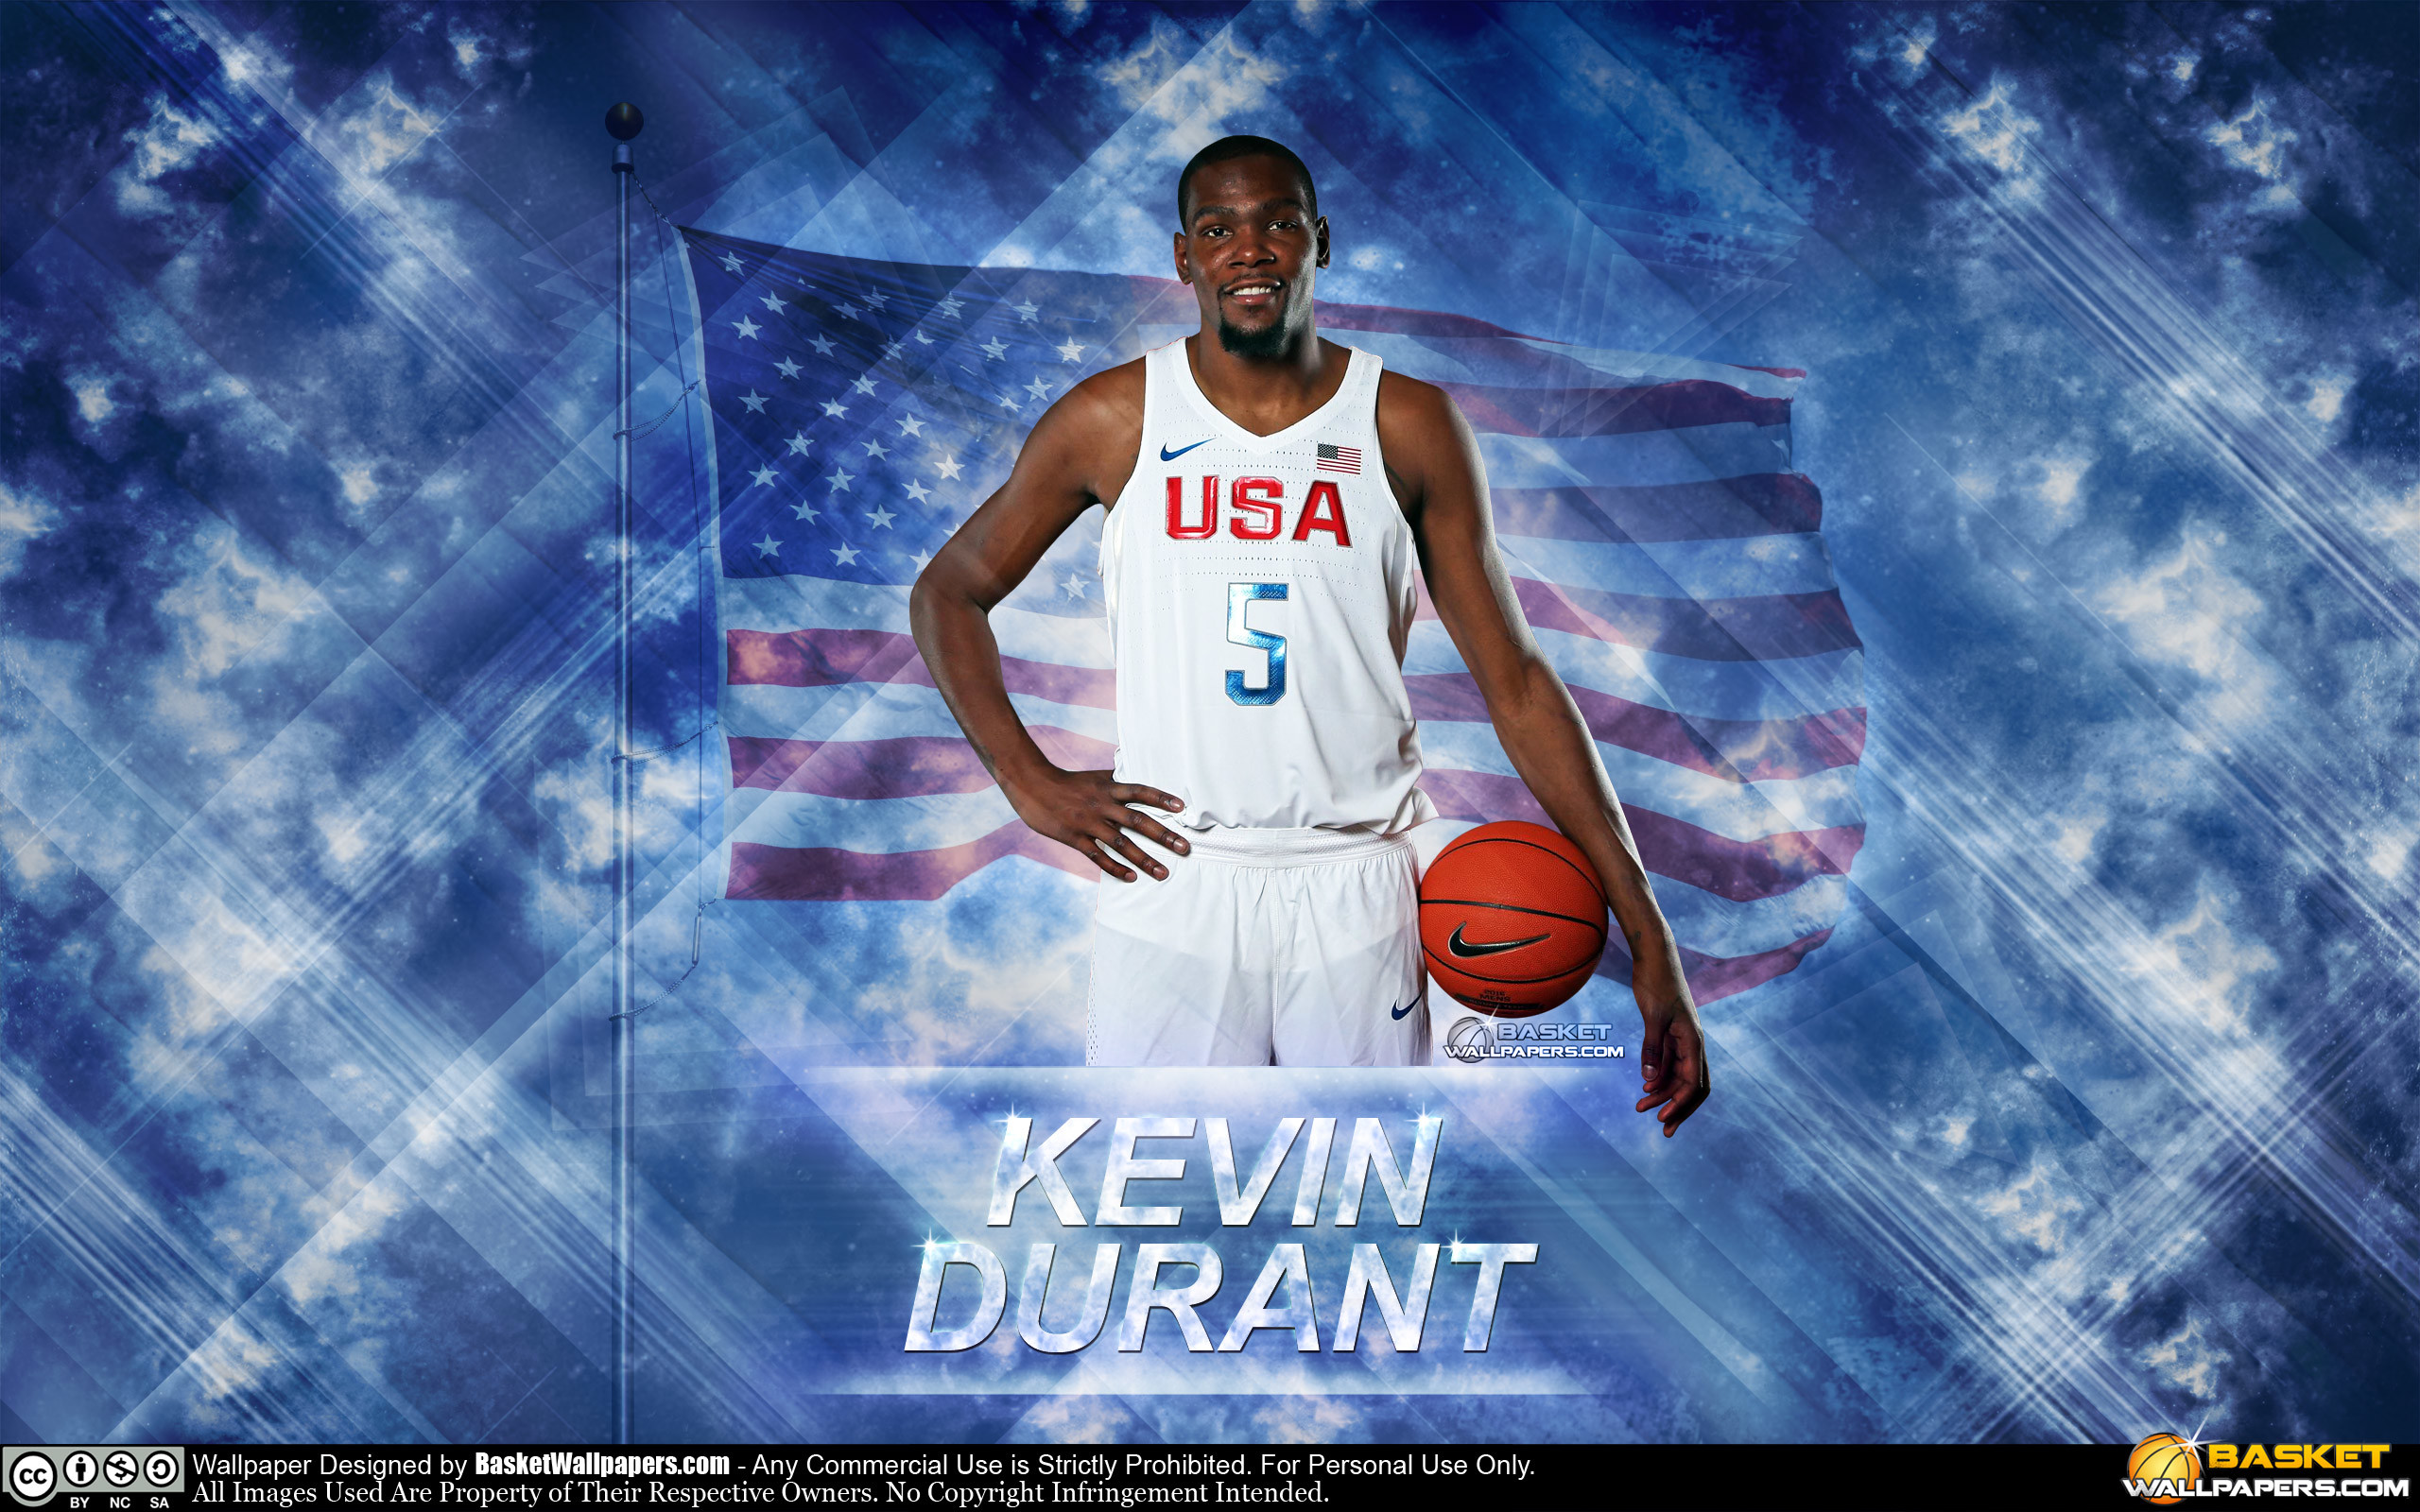 NBA World Reacts to Kevin Durant Suns Trade